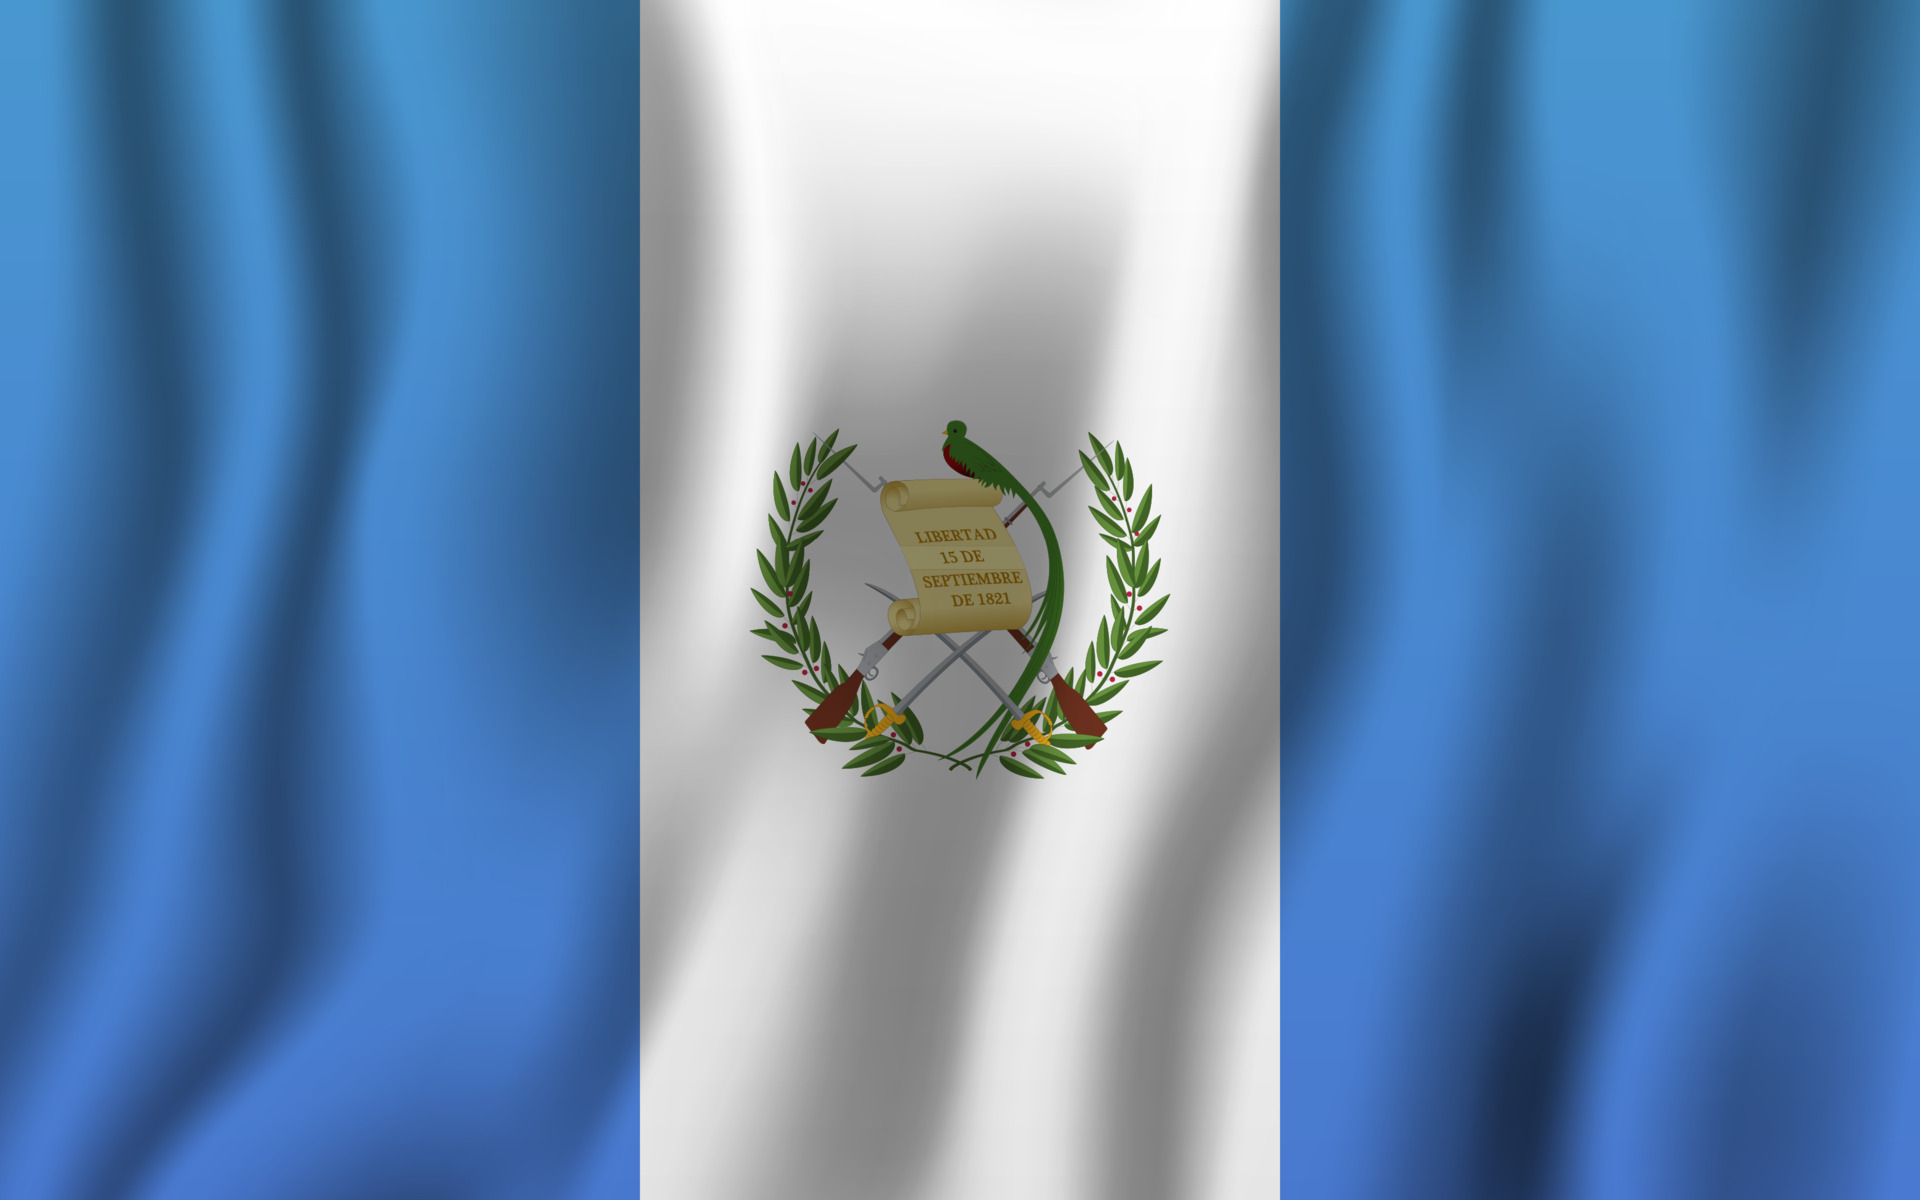 Guatemala Flag Wallpapers Apk Download for Android Latest version 30  comflagwallpaperguatemala